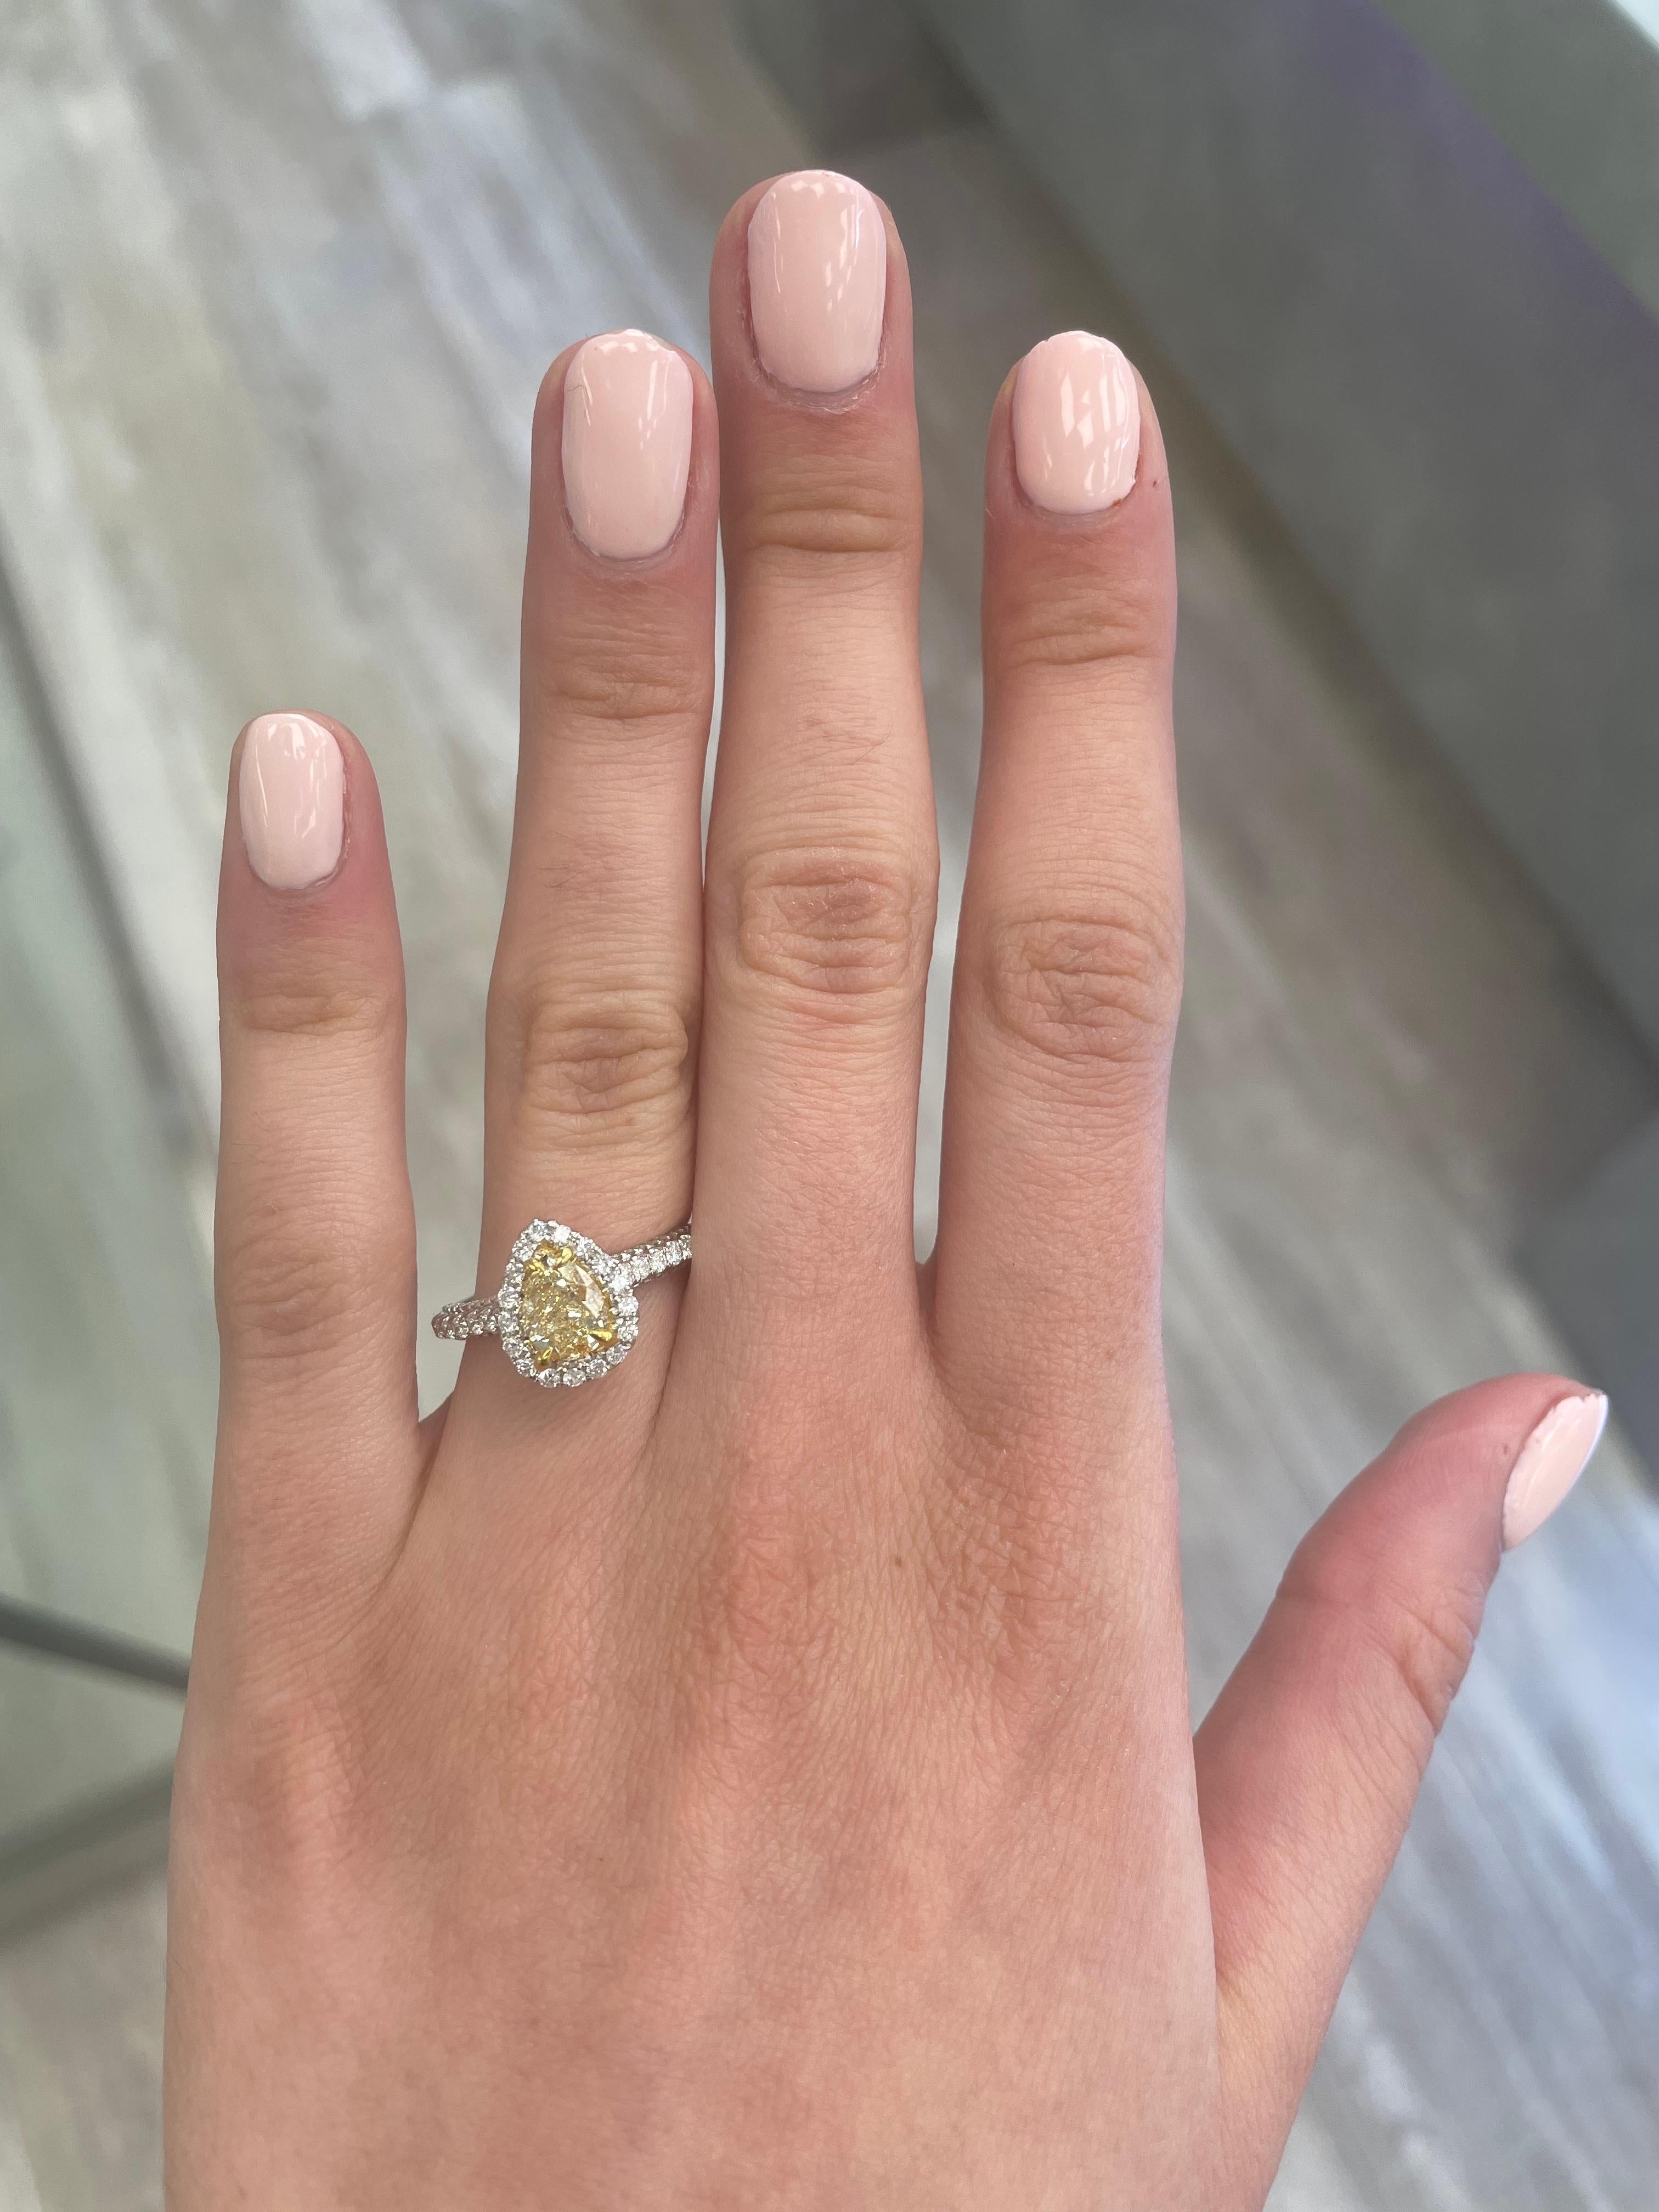 Stunning modern EGL certified yellow diamond with halo ring, two-tone 18k yellow and white gold. By Alexander Beverly Hills
1.55 carats total diamond weight.
1.01 carat pear cut Fancy Intense Yellow color and SI1 clarity diamond, EGL graded.